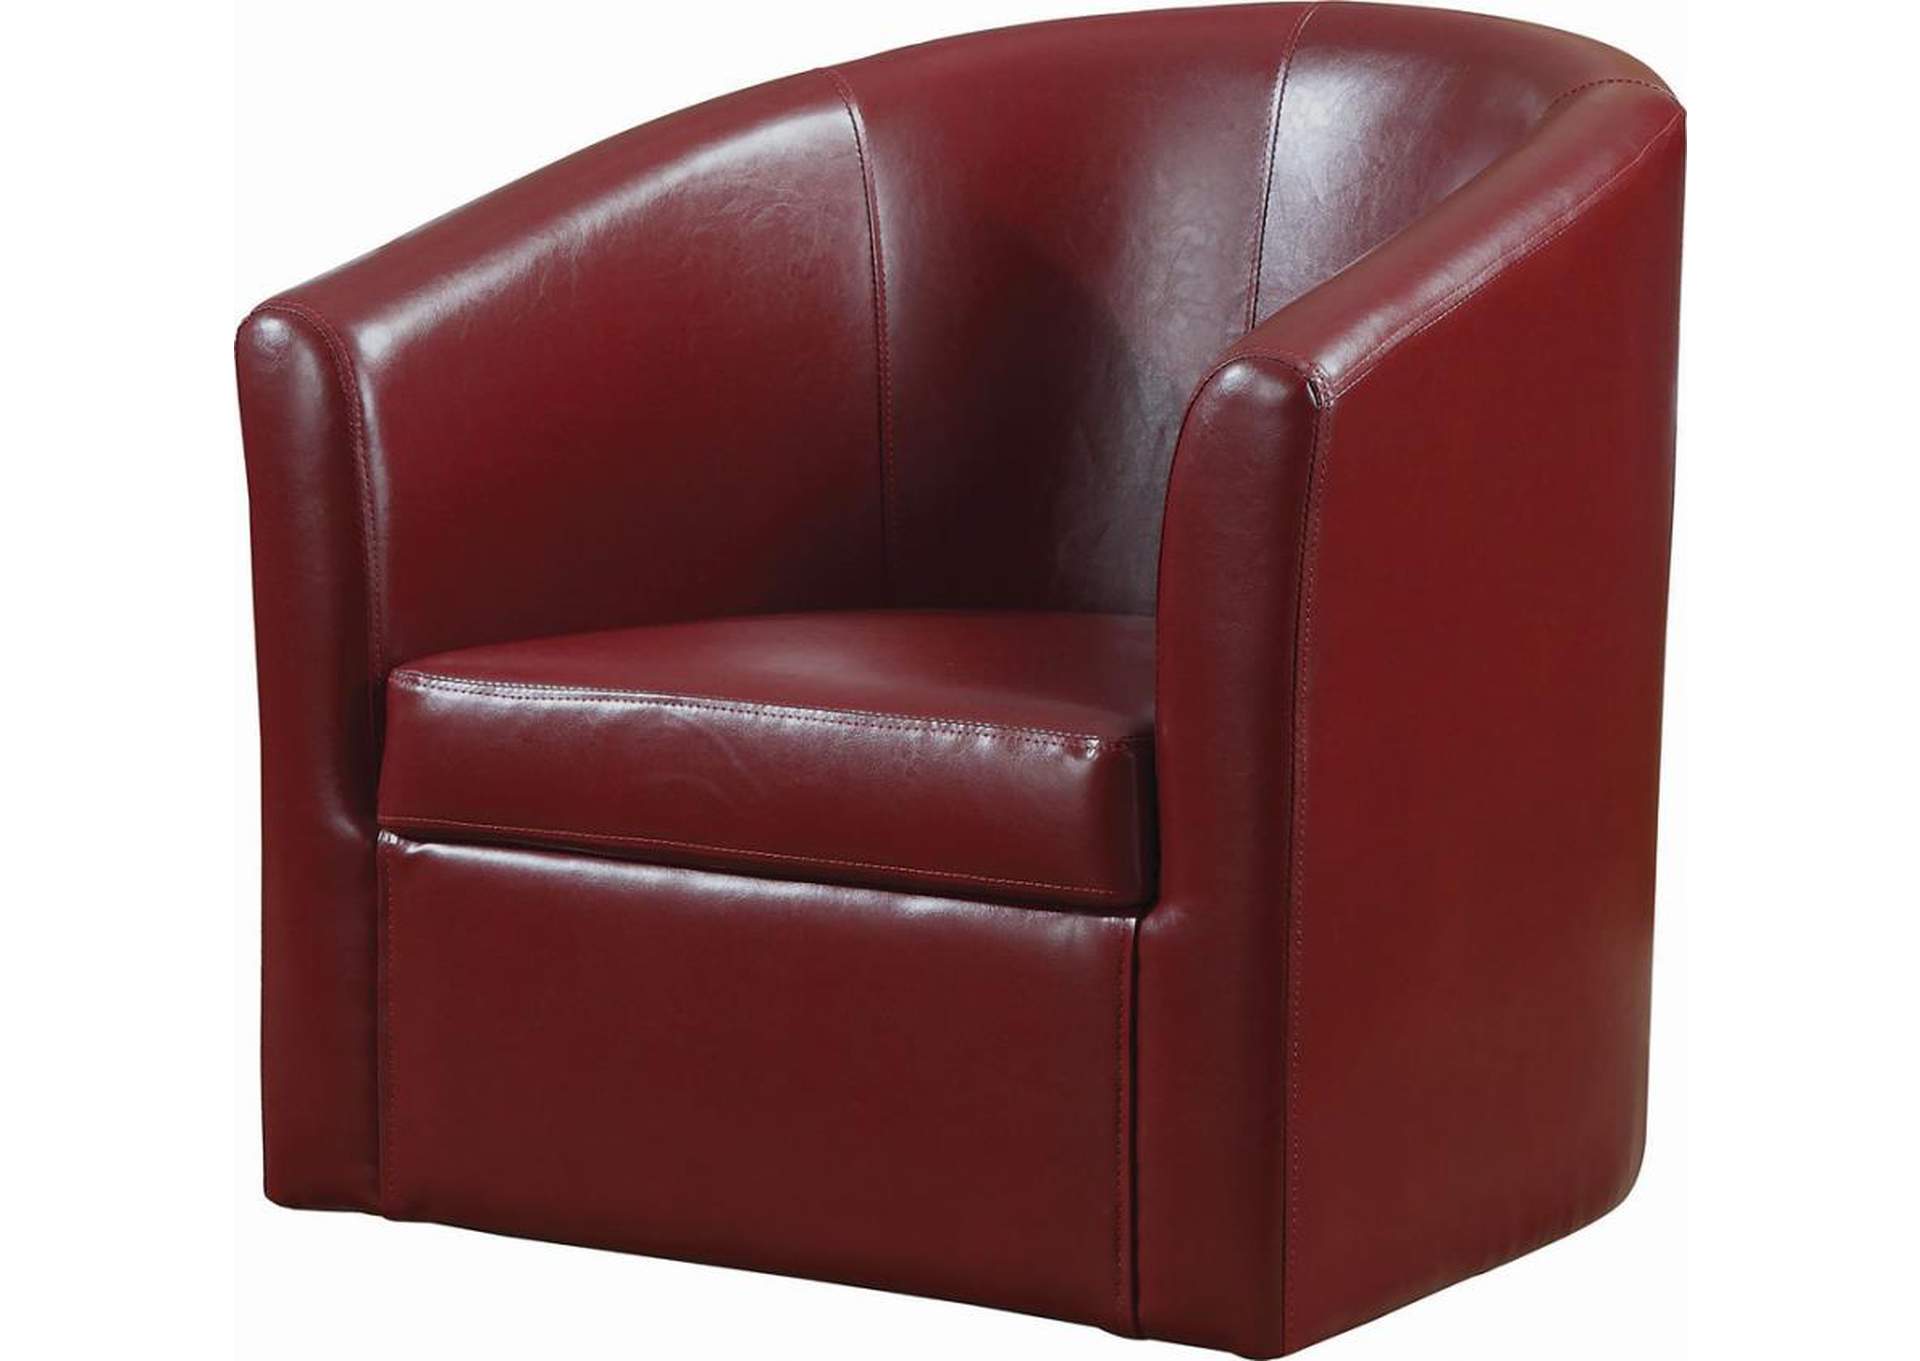 Upholstery Sloped Arm Accent Swivel Chair Red,Coaster Furniture